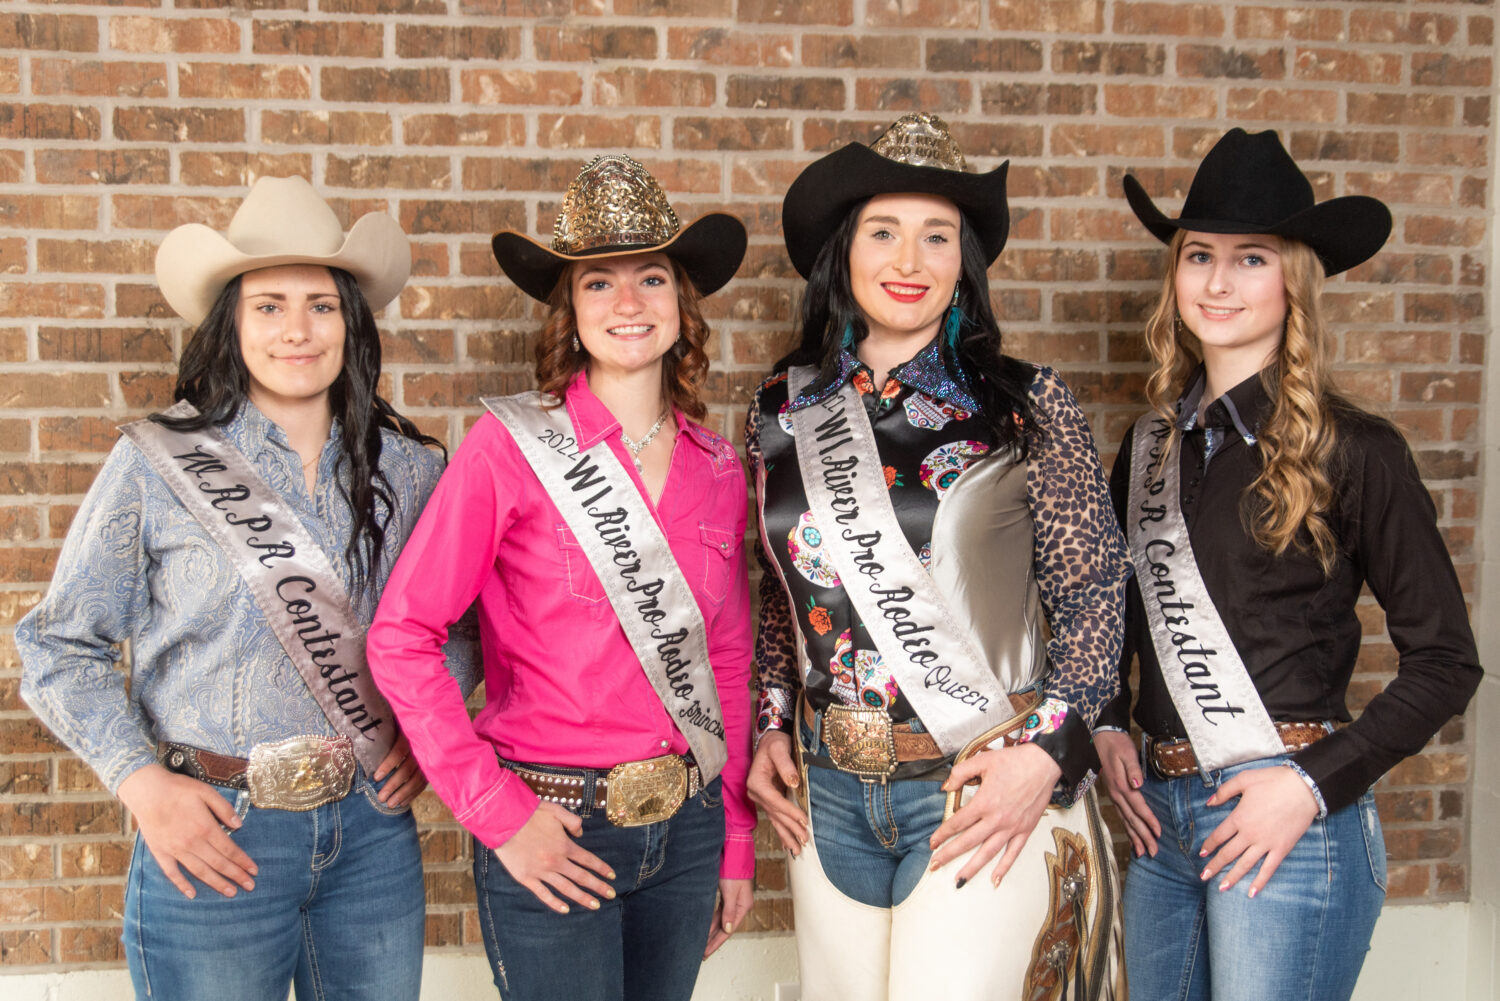 Wisconsin River Pro Rodeo contestants compete to the 2023 Queen